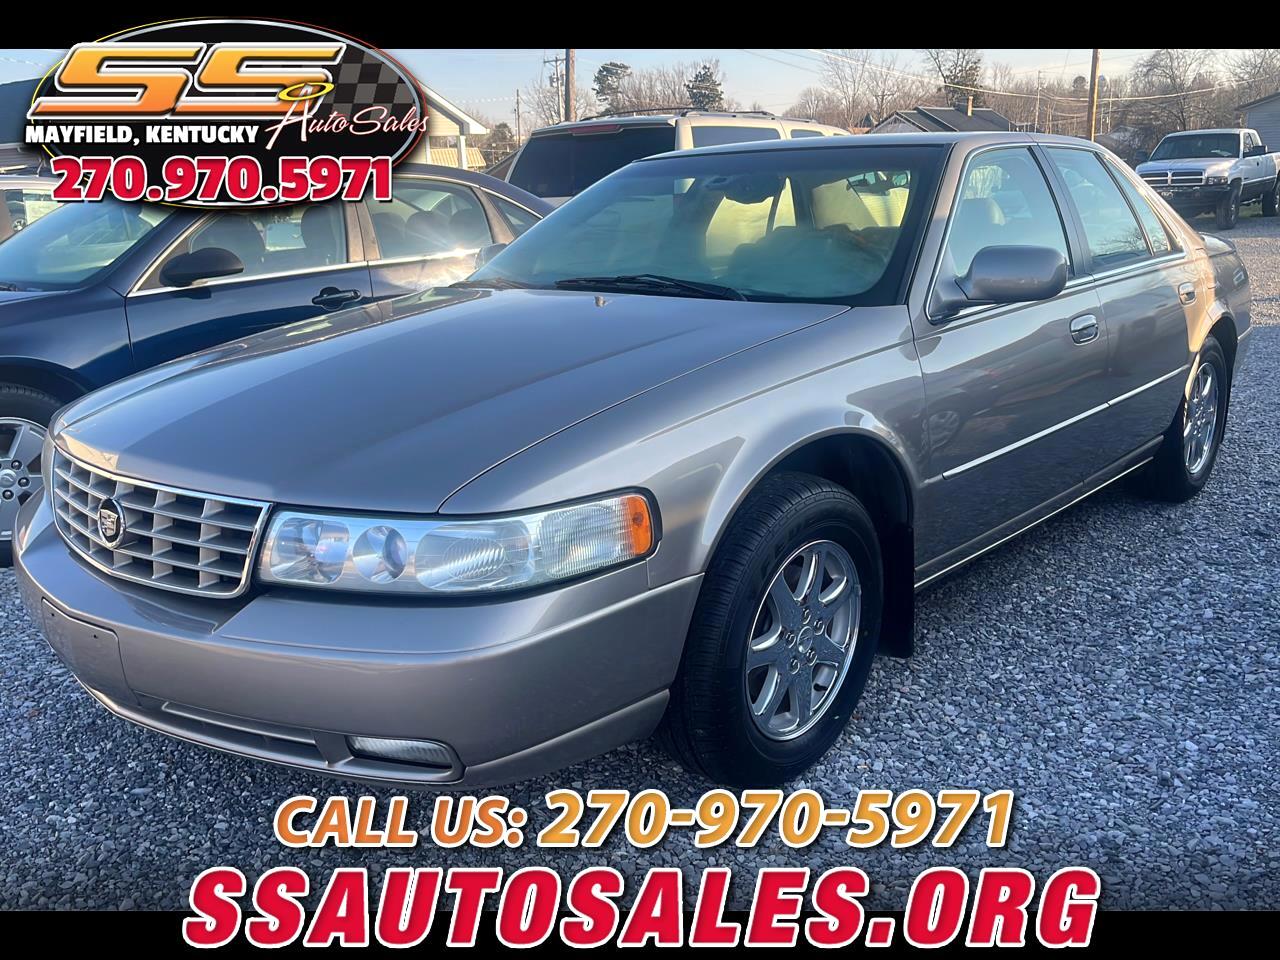 Used 2002 Cadillac Seville SLS for Sale in Mayfield KY 42066 SS Auto Sales  of Mayfield